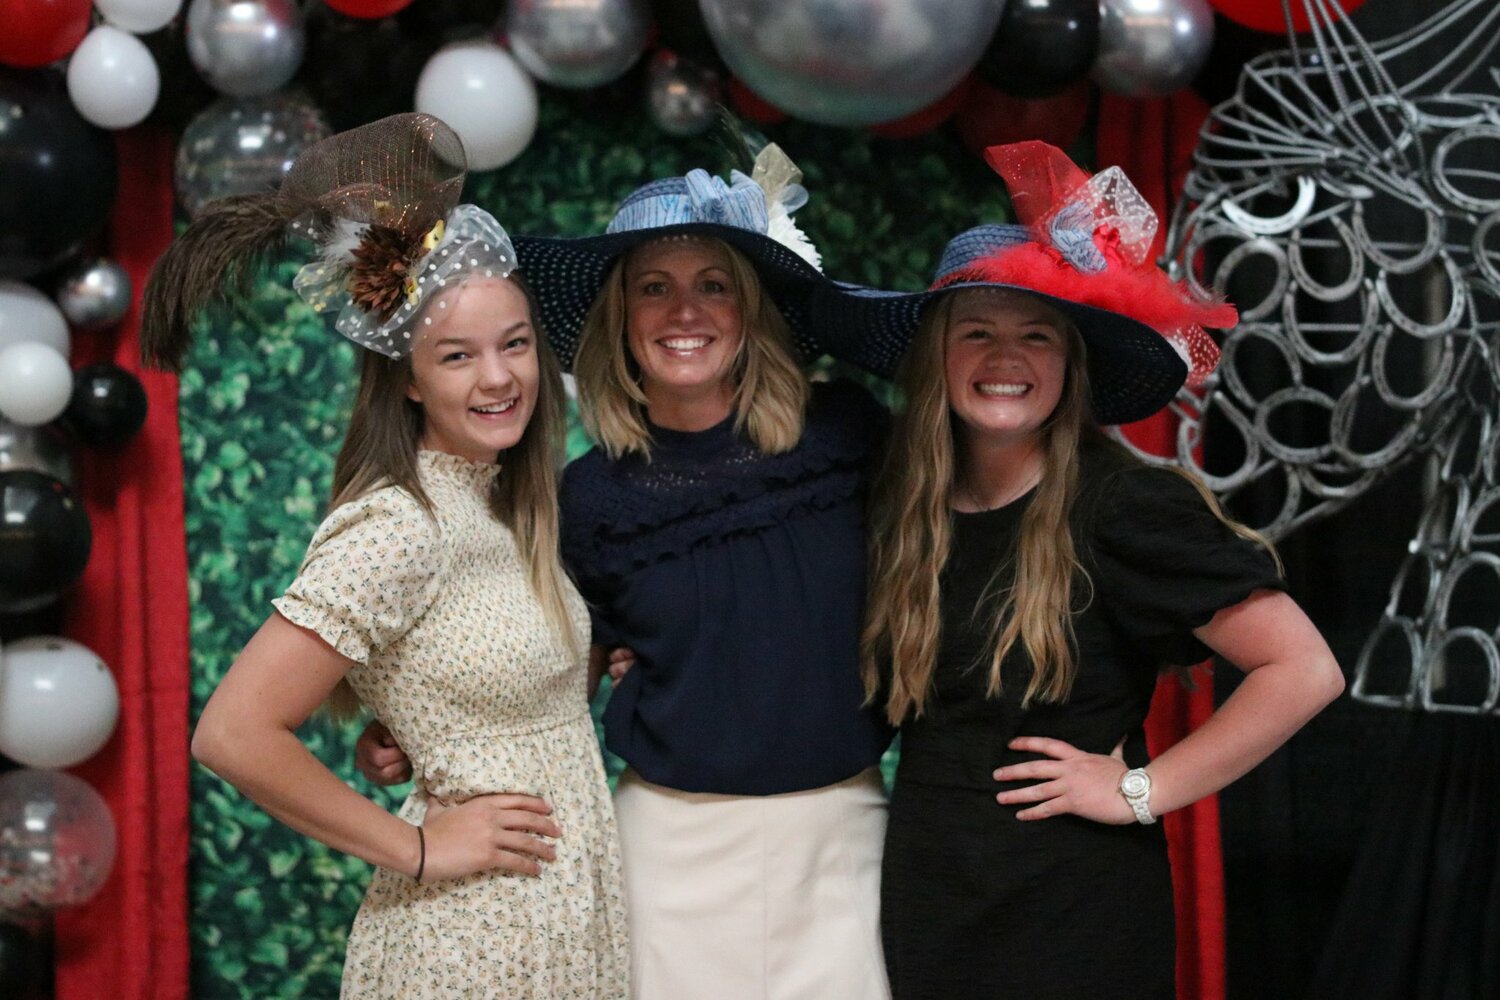 From left, Zoe Bennett, Melanie Bennett and Alexis Bennett show off their Derby hats at the 2022 PFAC Kentucky Derby Party. The event returns this Saturday, May 4 at the Sublette County Fairgrounds and raises money to help support PFAC’s numerous arts programs for kids in the county. Tickets are on sale at Office Outlets in Pinedale and Big Piney and will be available at the door.